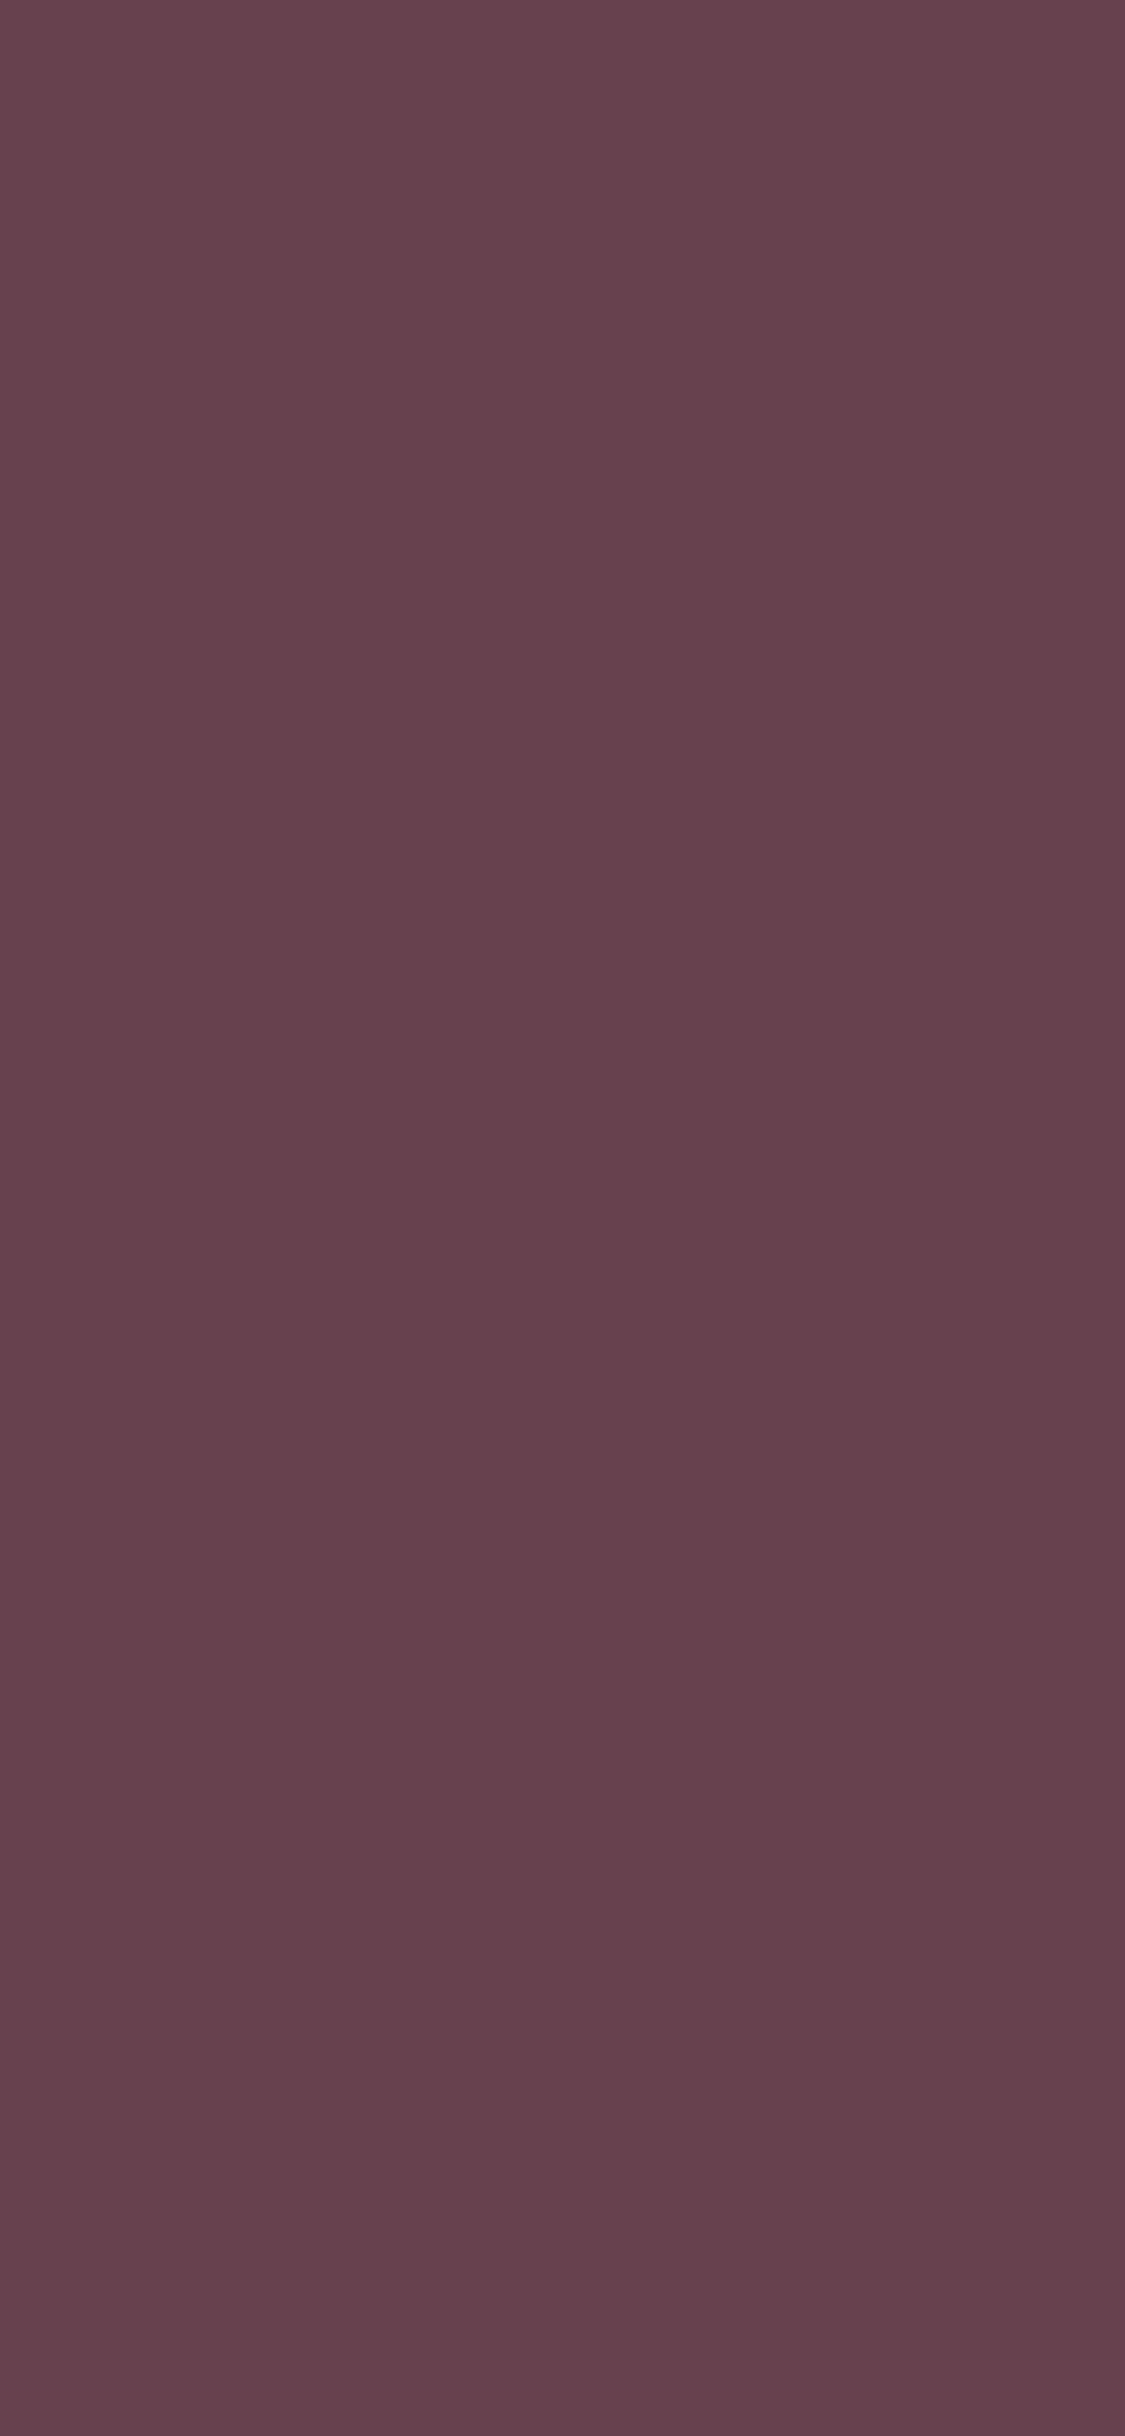 1125x2436 Deep Tuscan Red Solid Color Background